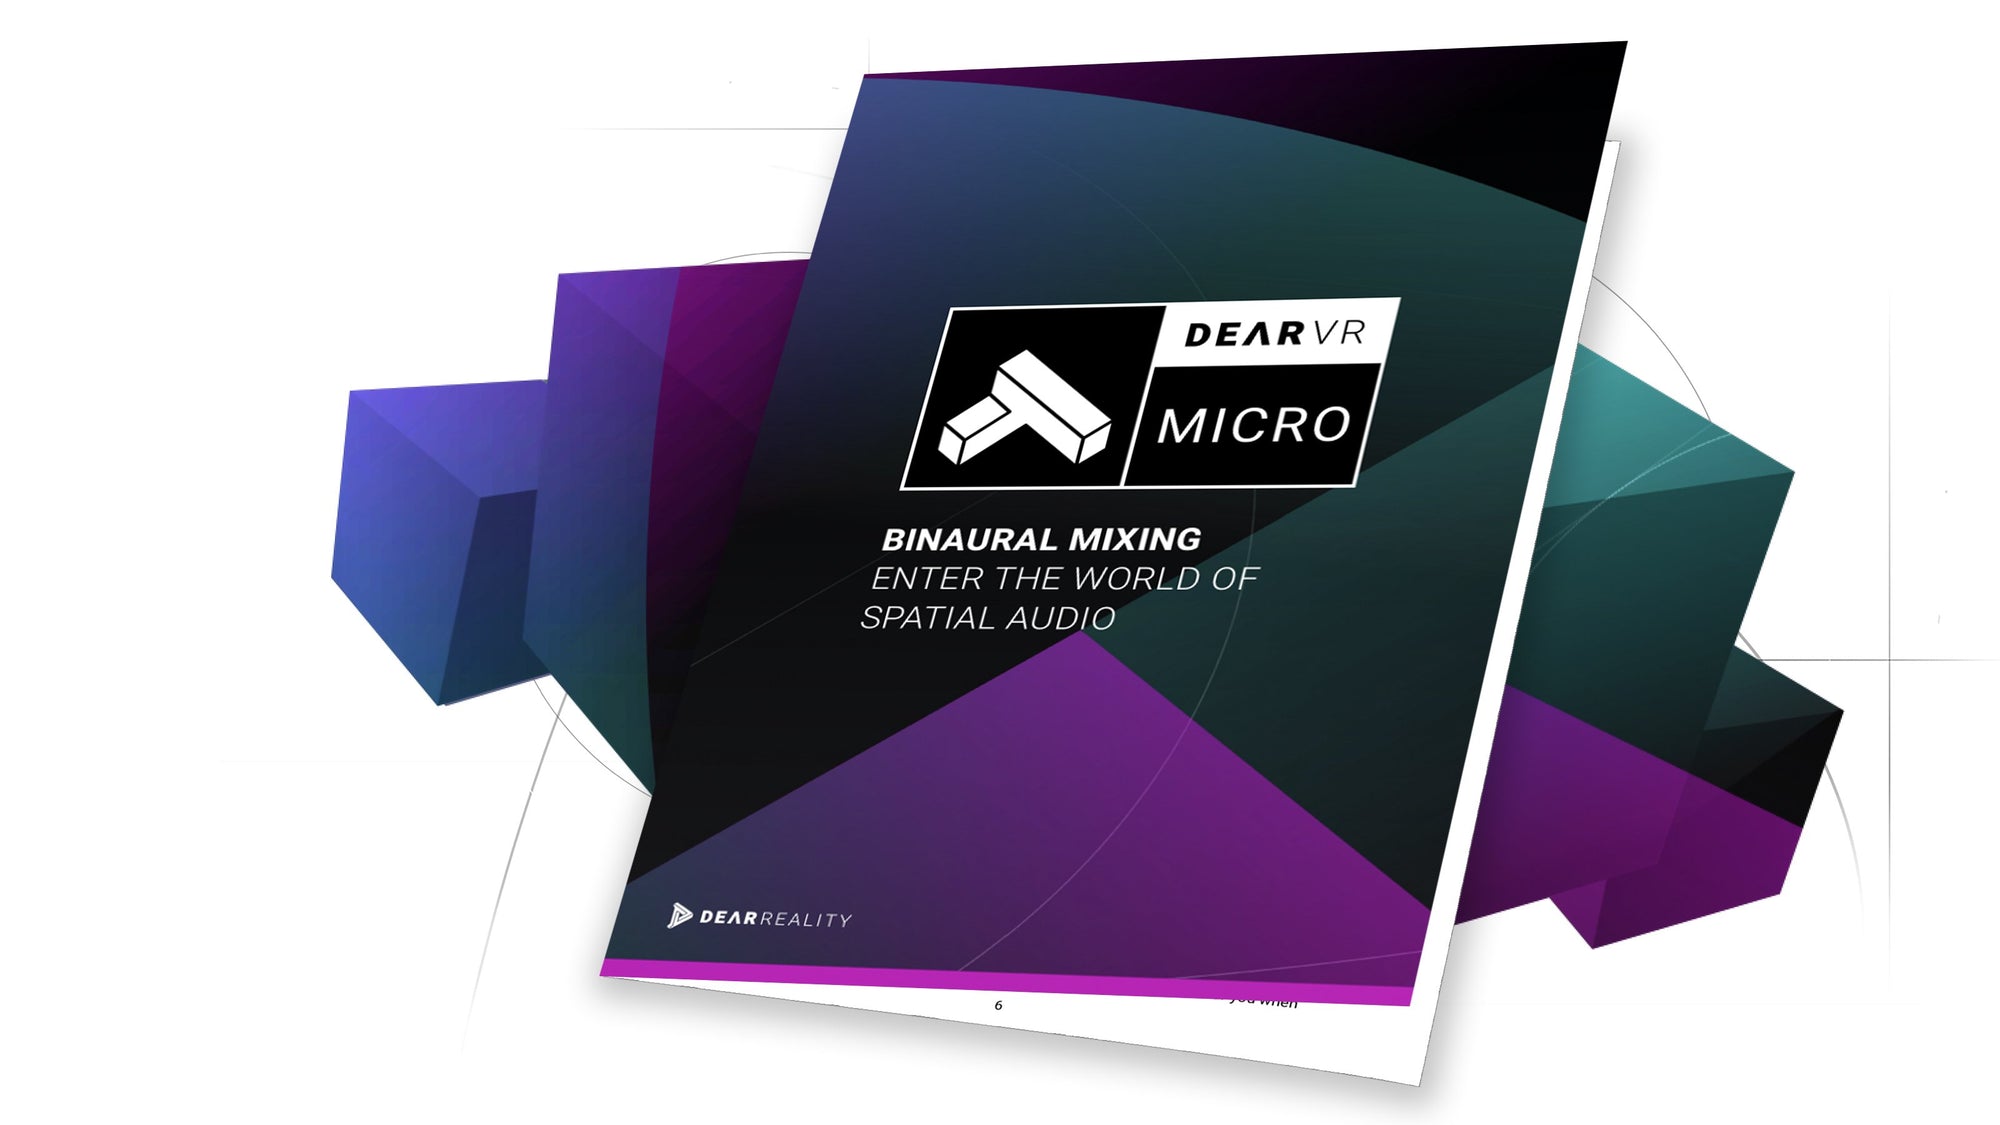 Download the dearVR MICRO manual to get detailed insights